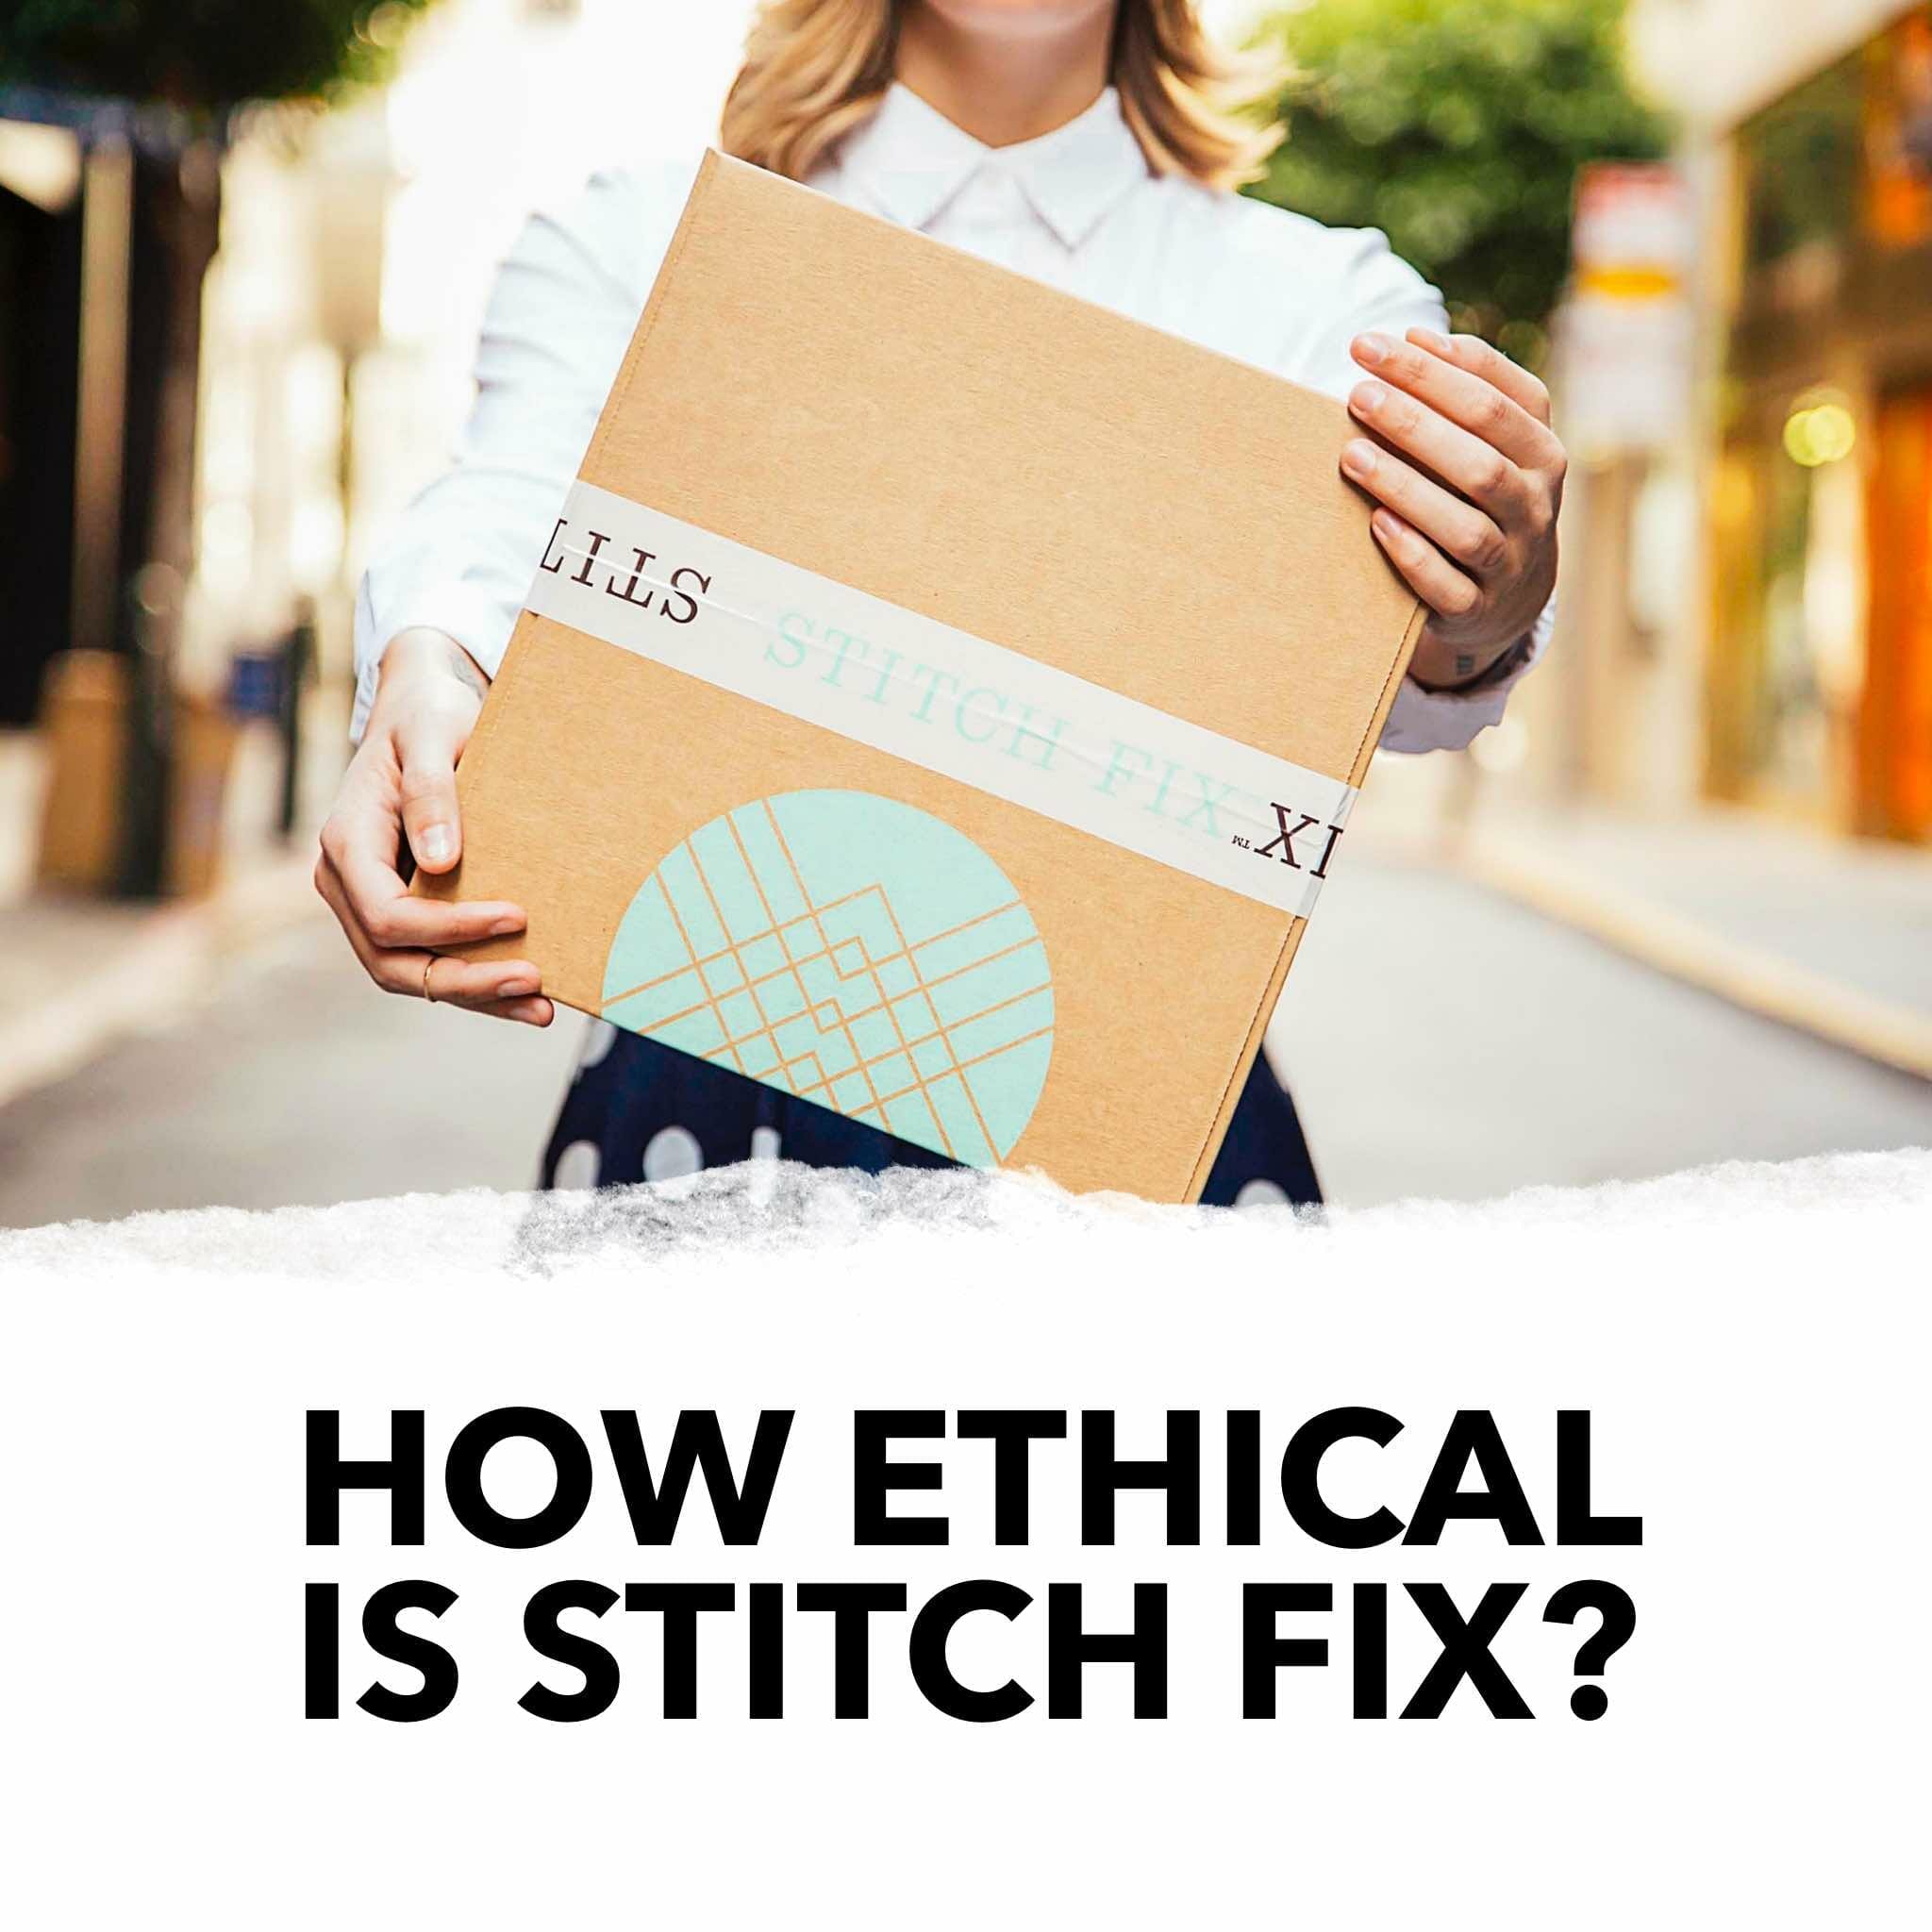 is stitch fix ethical?